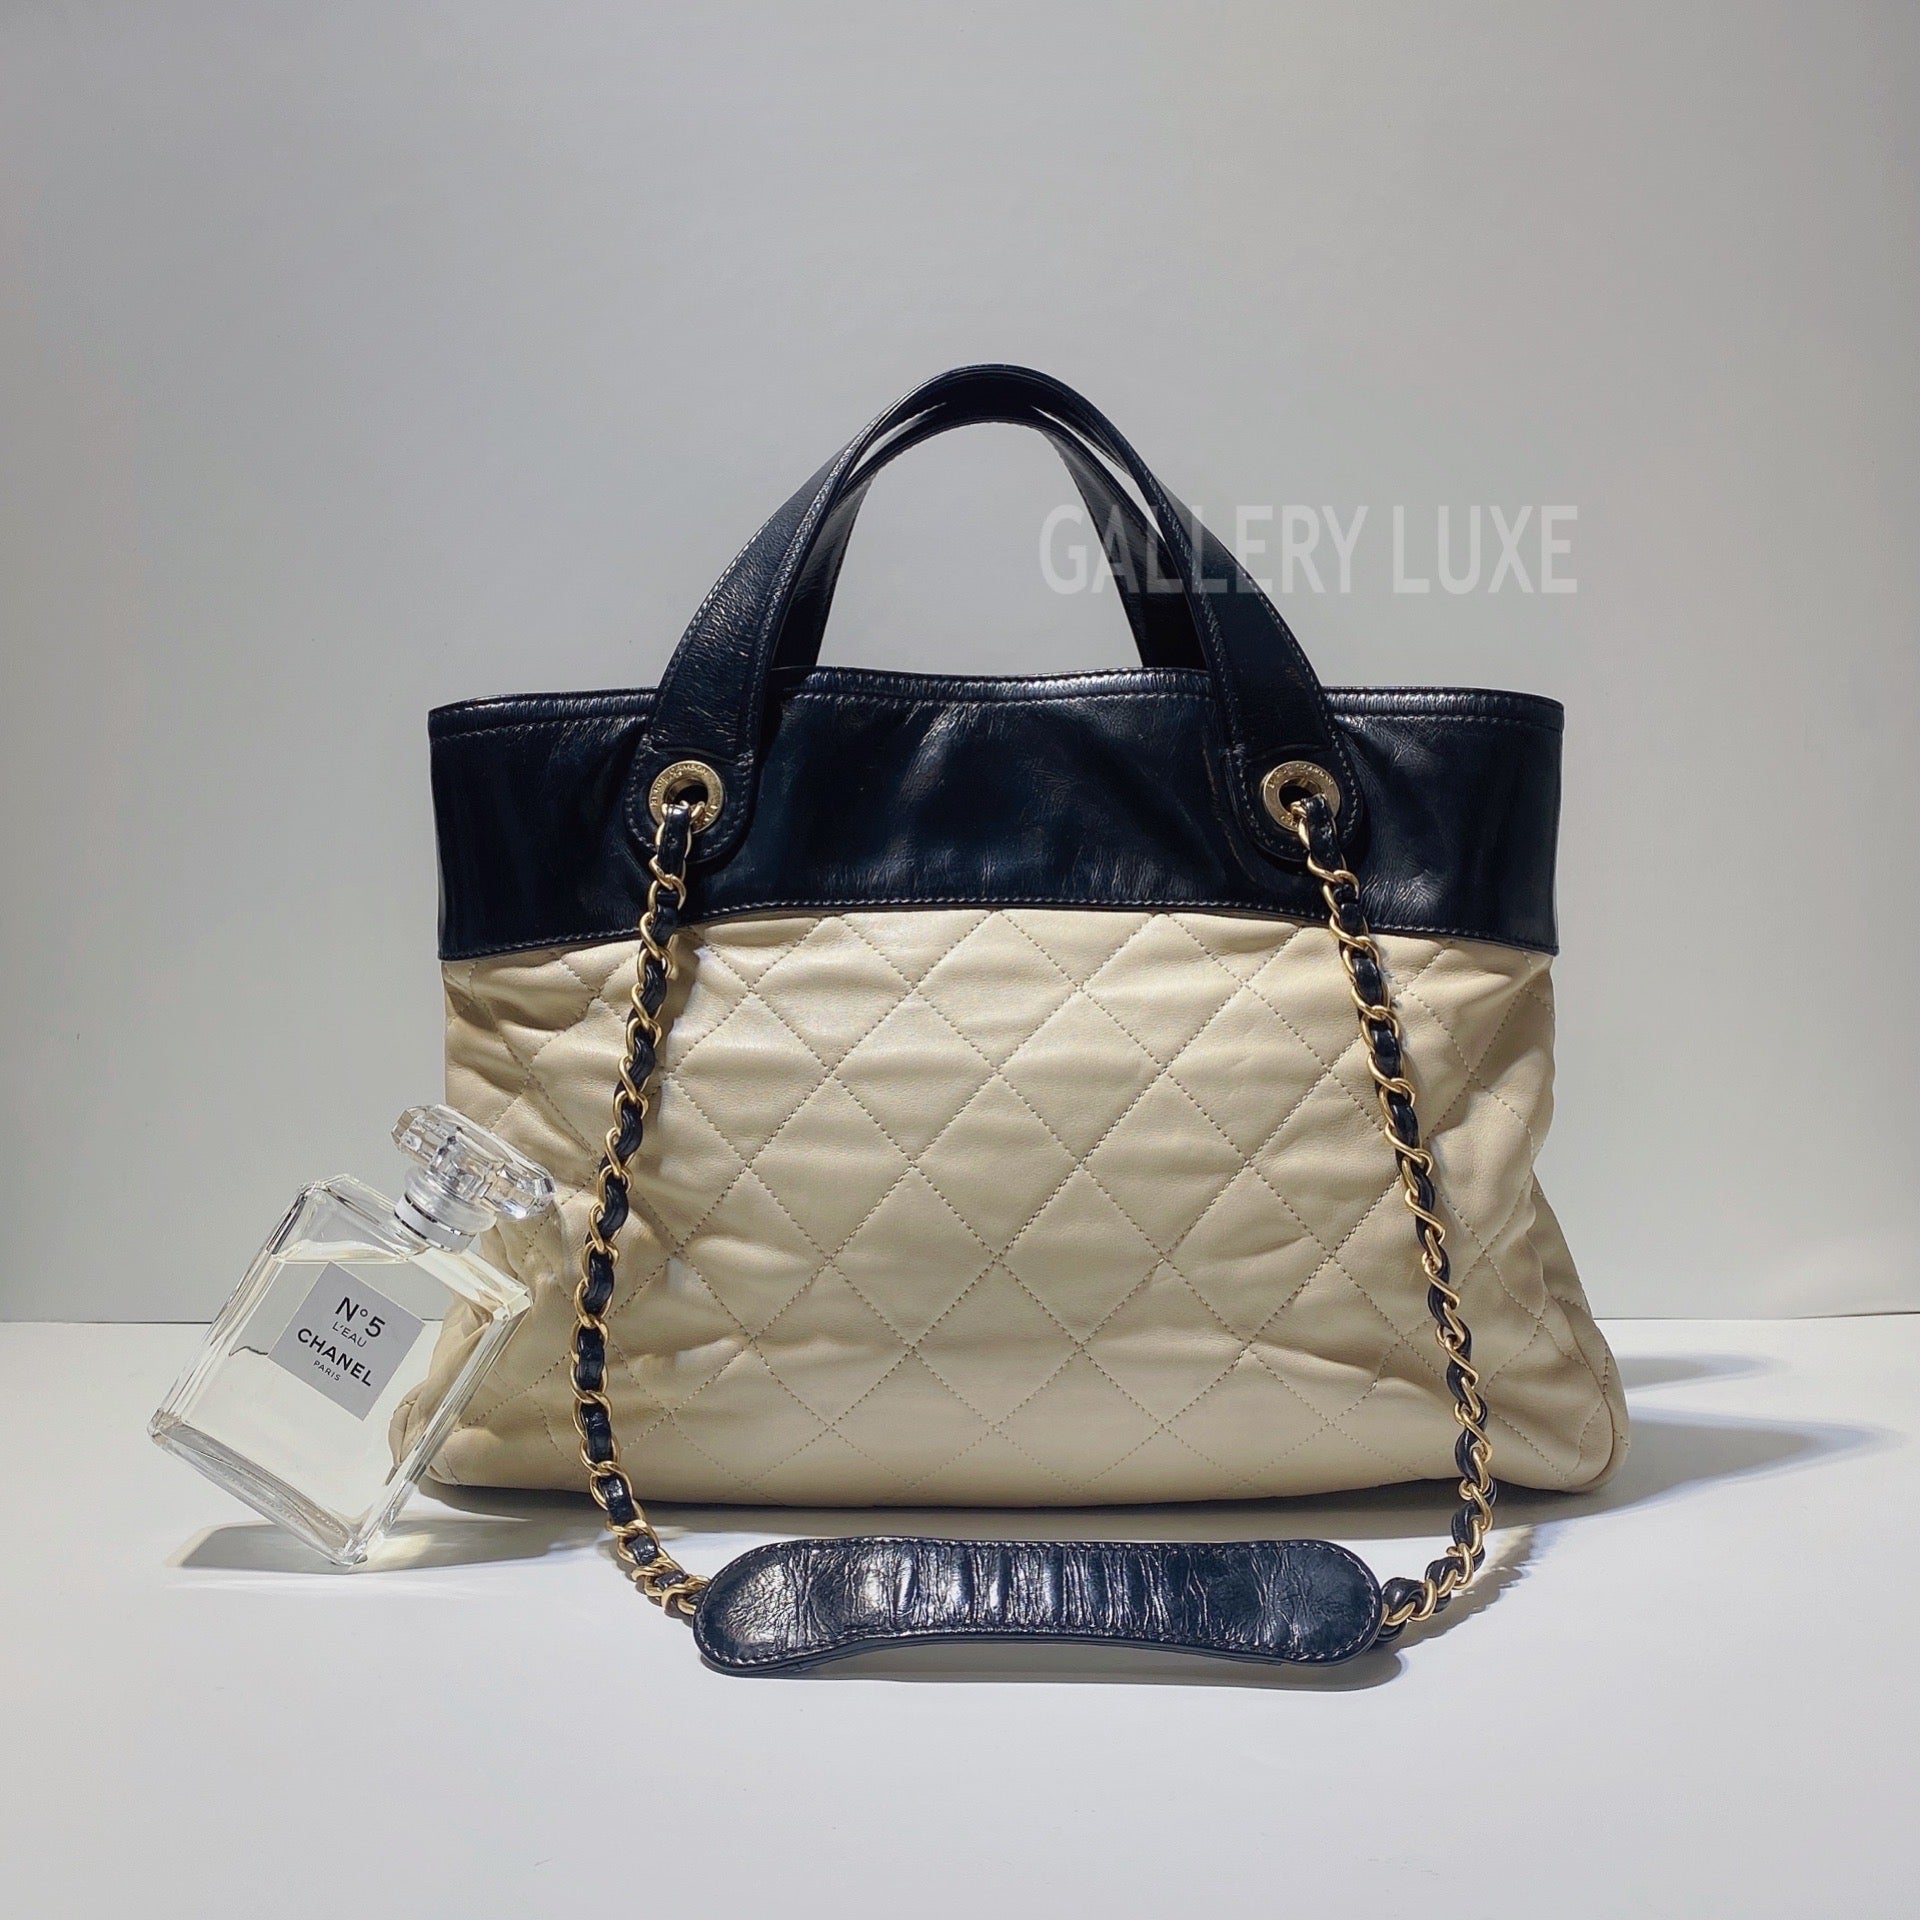 Chanel In The Mix Seasonal Tote - Luxe Du Jour